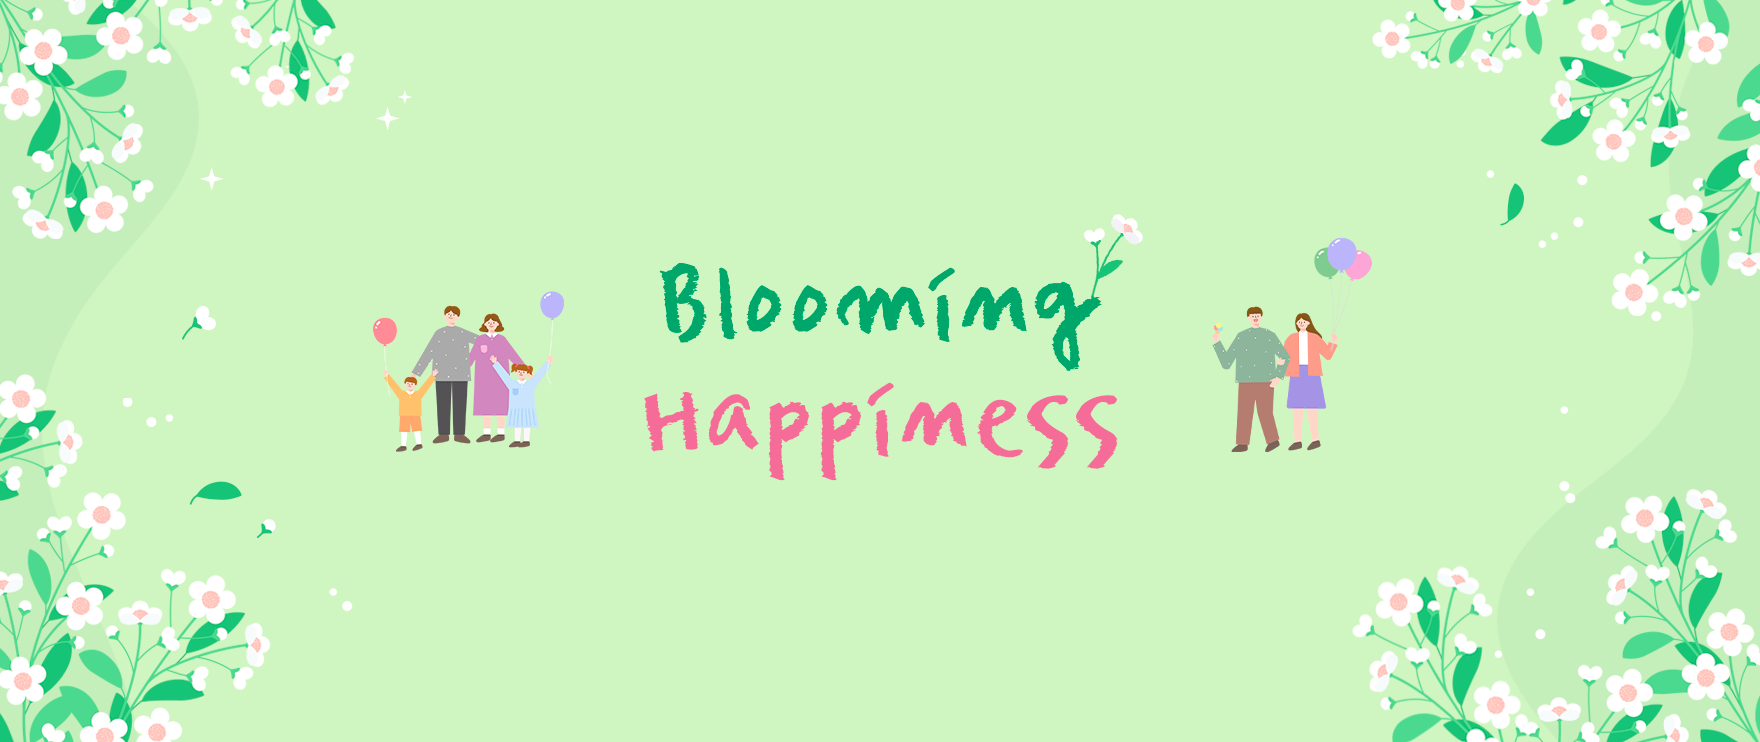 Blooming Happiness